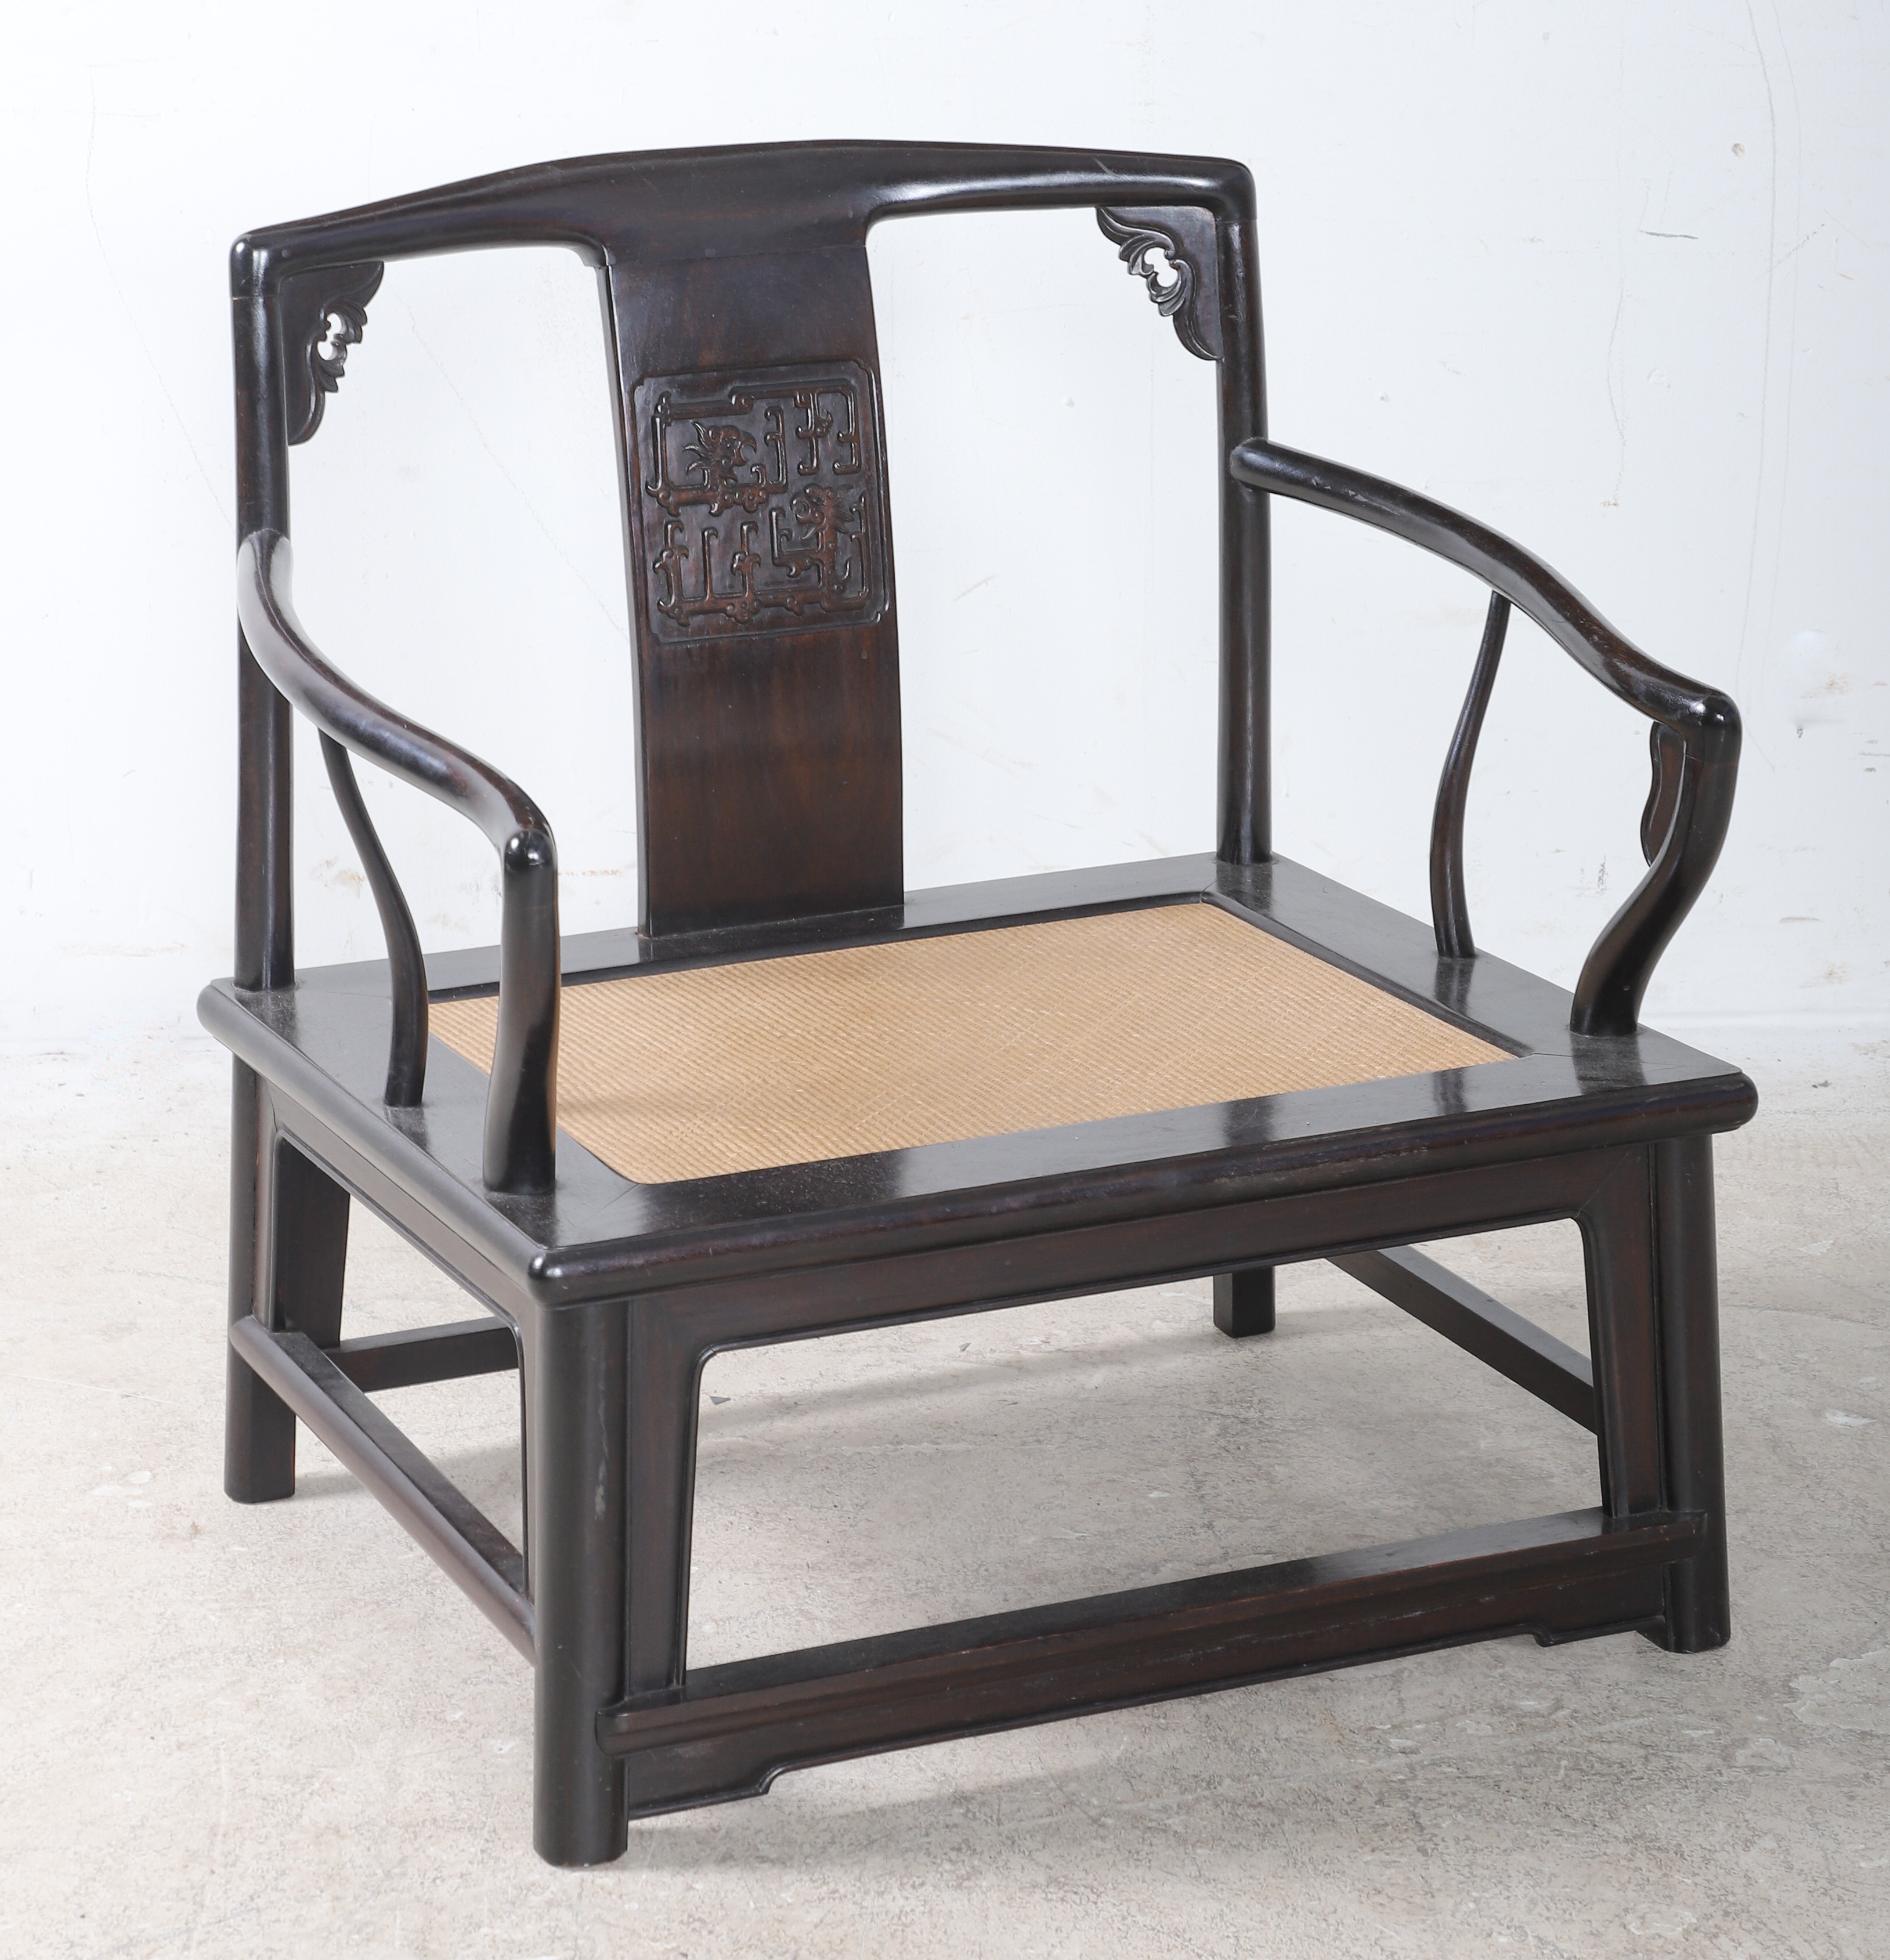 Chinese elmwood low chair bentwood 3ca7ad